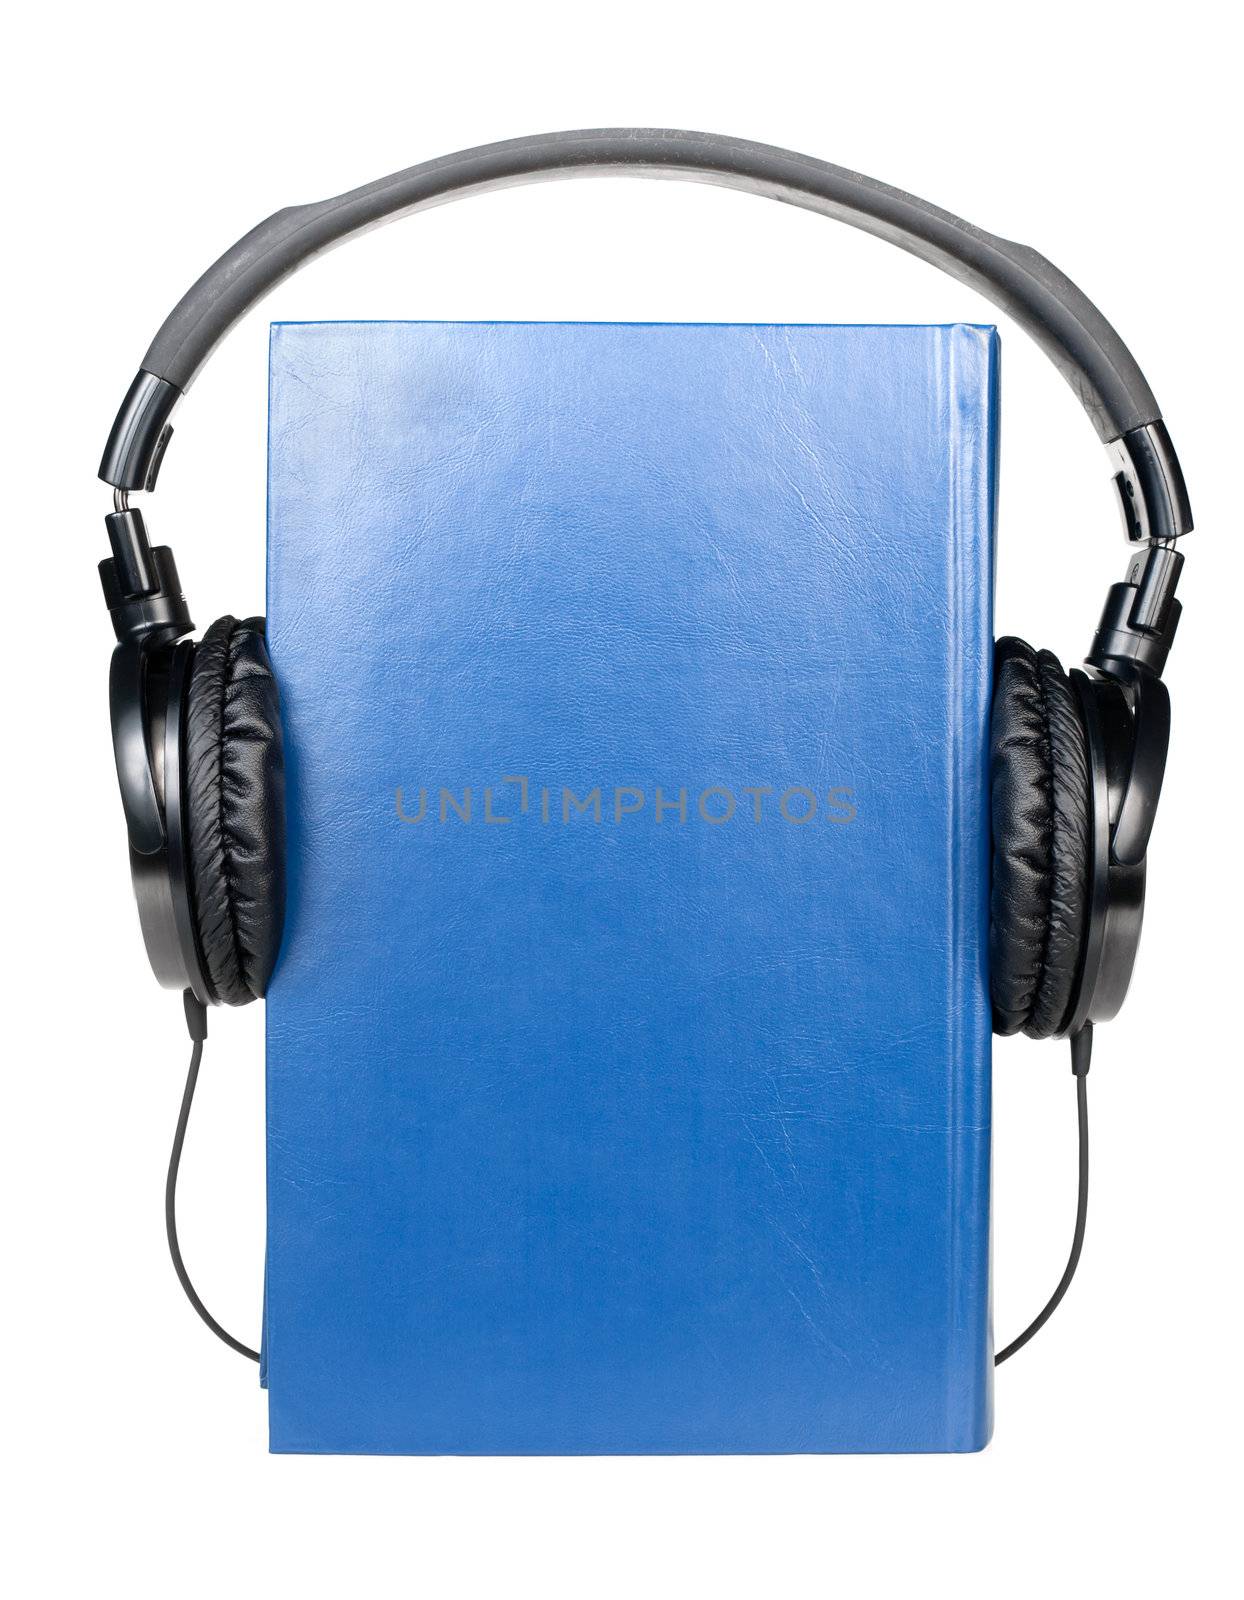 Blue book with HI-Fi headphones on white background